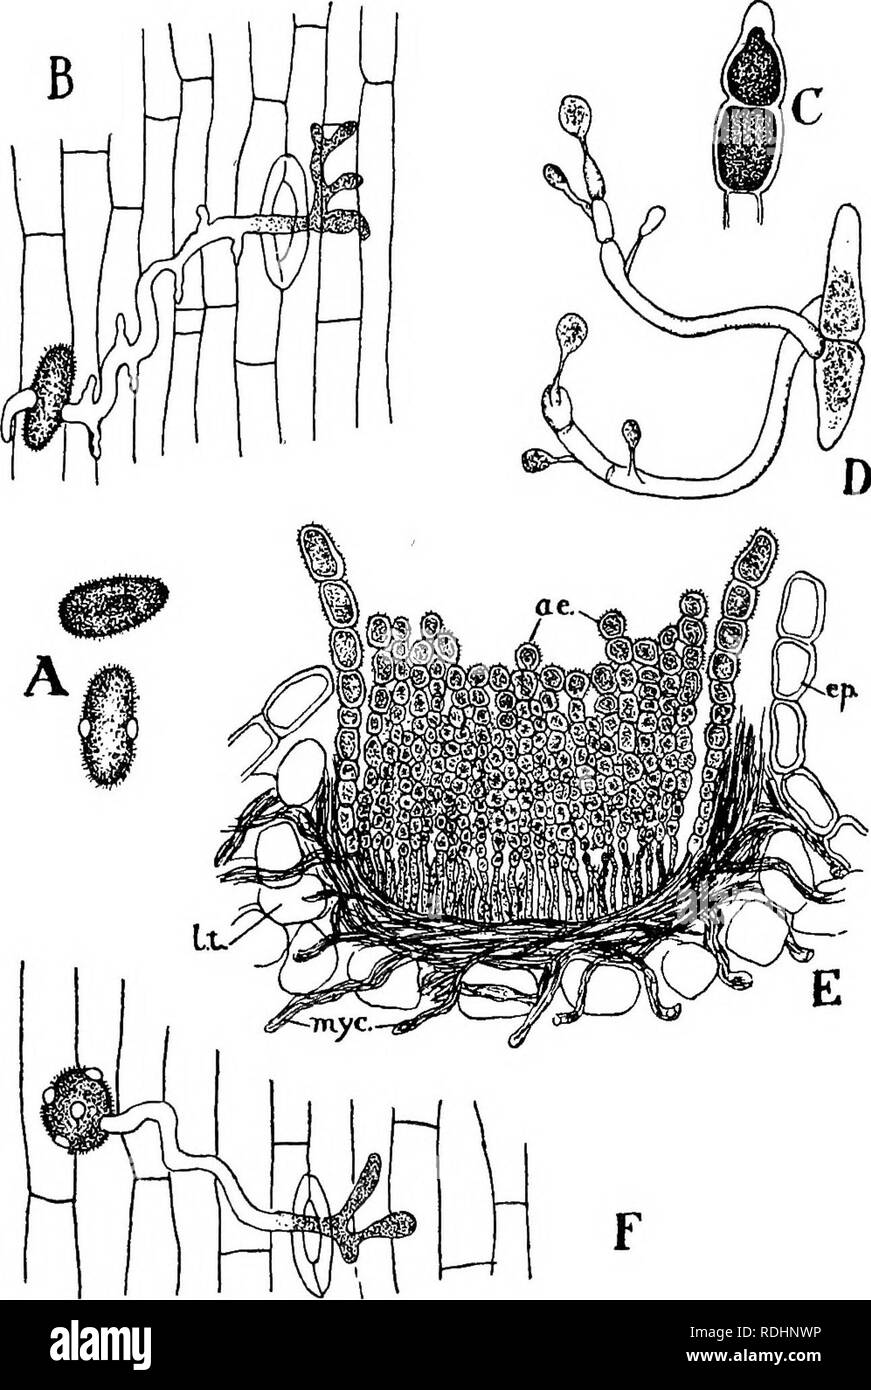 . Elements of plant biology. Plant physiology. LIFE HISTORY OF RUST FUNGI 179. on the surface, and the aggregation of protoplasm in the branched apex. X 475. C, single teleutospore. X 200. D, germination of teleutospore of another rust fungus and formation of sporidia. X 475. E, aecidium cup of another form in vertical section (crossrsection of leaf) ; myc, mycelium of the fungus; is, aecidio- spores; It., leaf tissue; ep., epidermis of leaf. (After De Bary.) X 150. F, germination of secidiospore on a grass leaf, penetration of a stoma by and branching of the germ tube. X 475. (All except E af Stock Photo